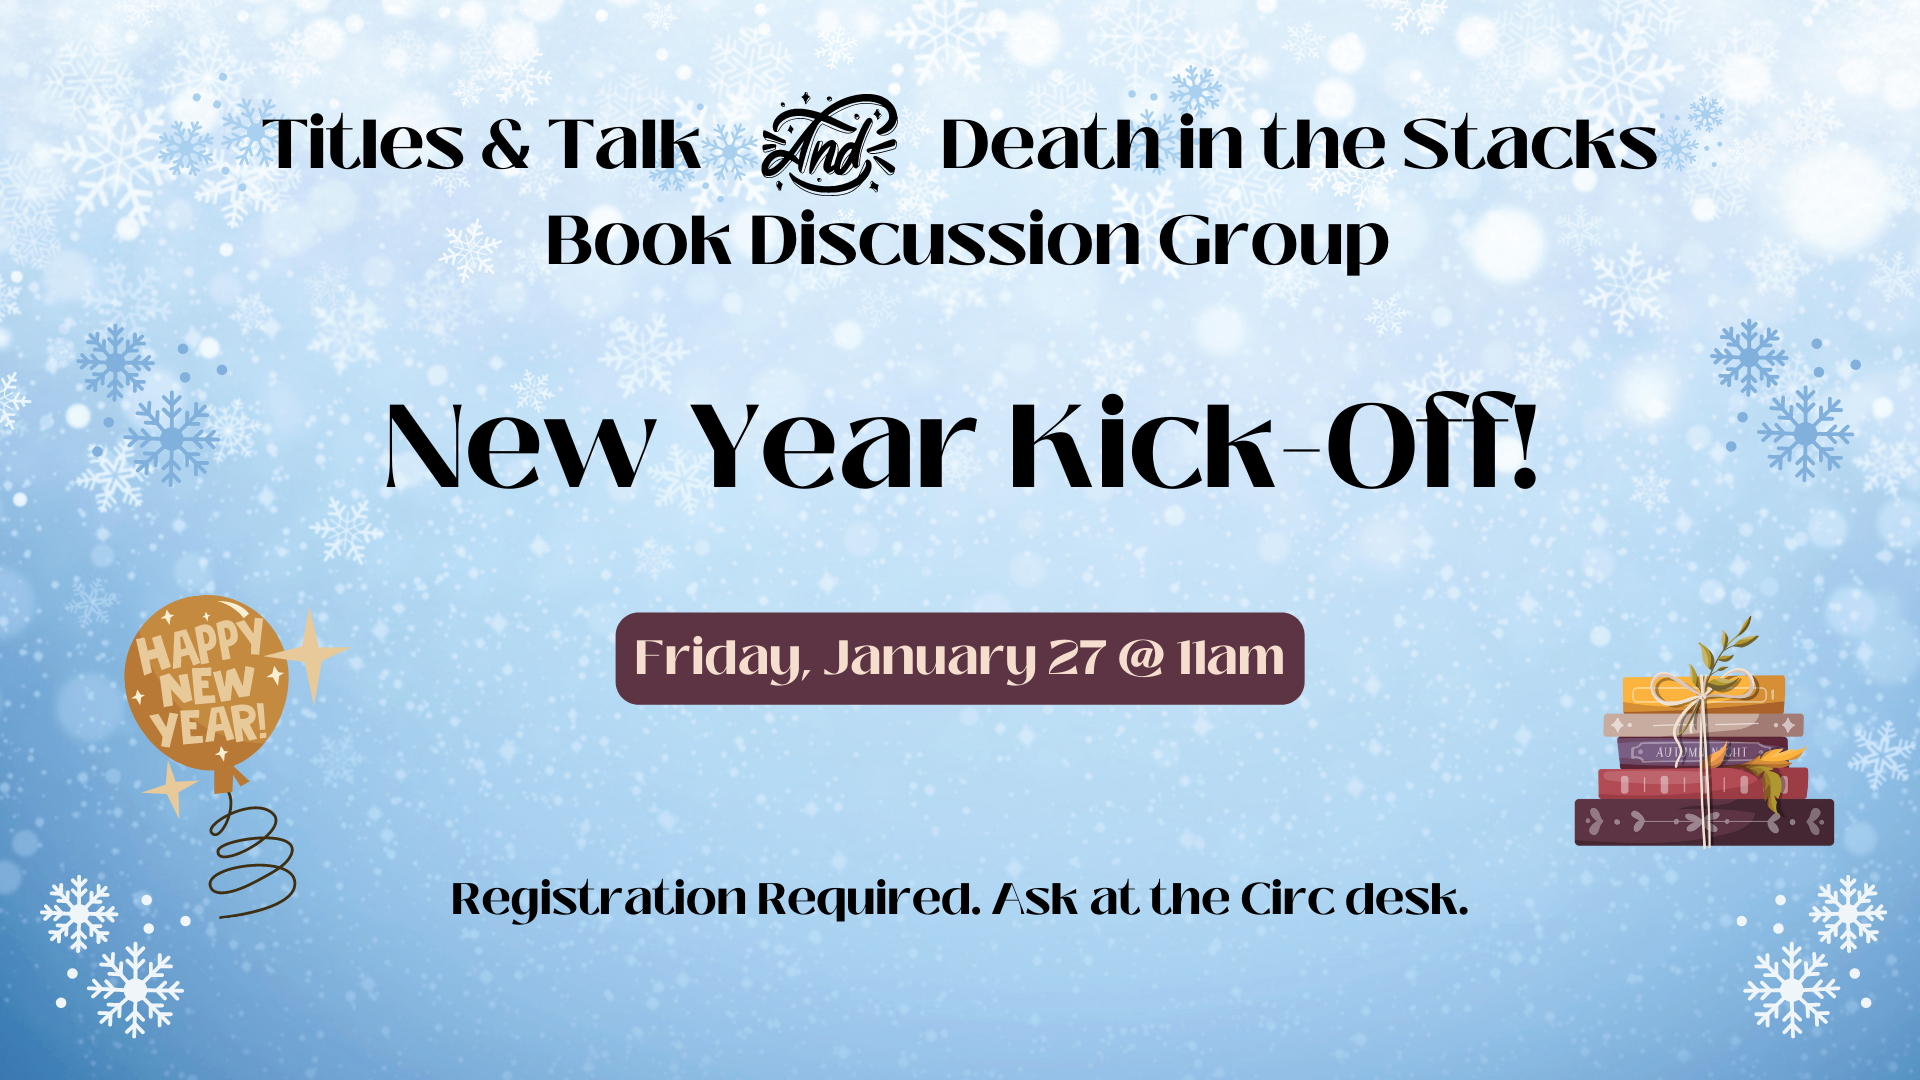 Book Discussion Groups Kick-Off